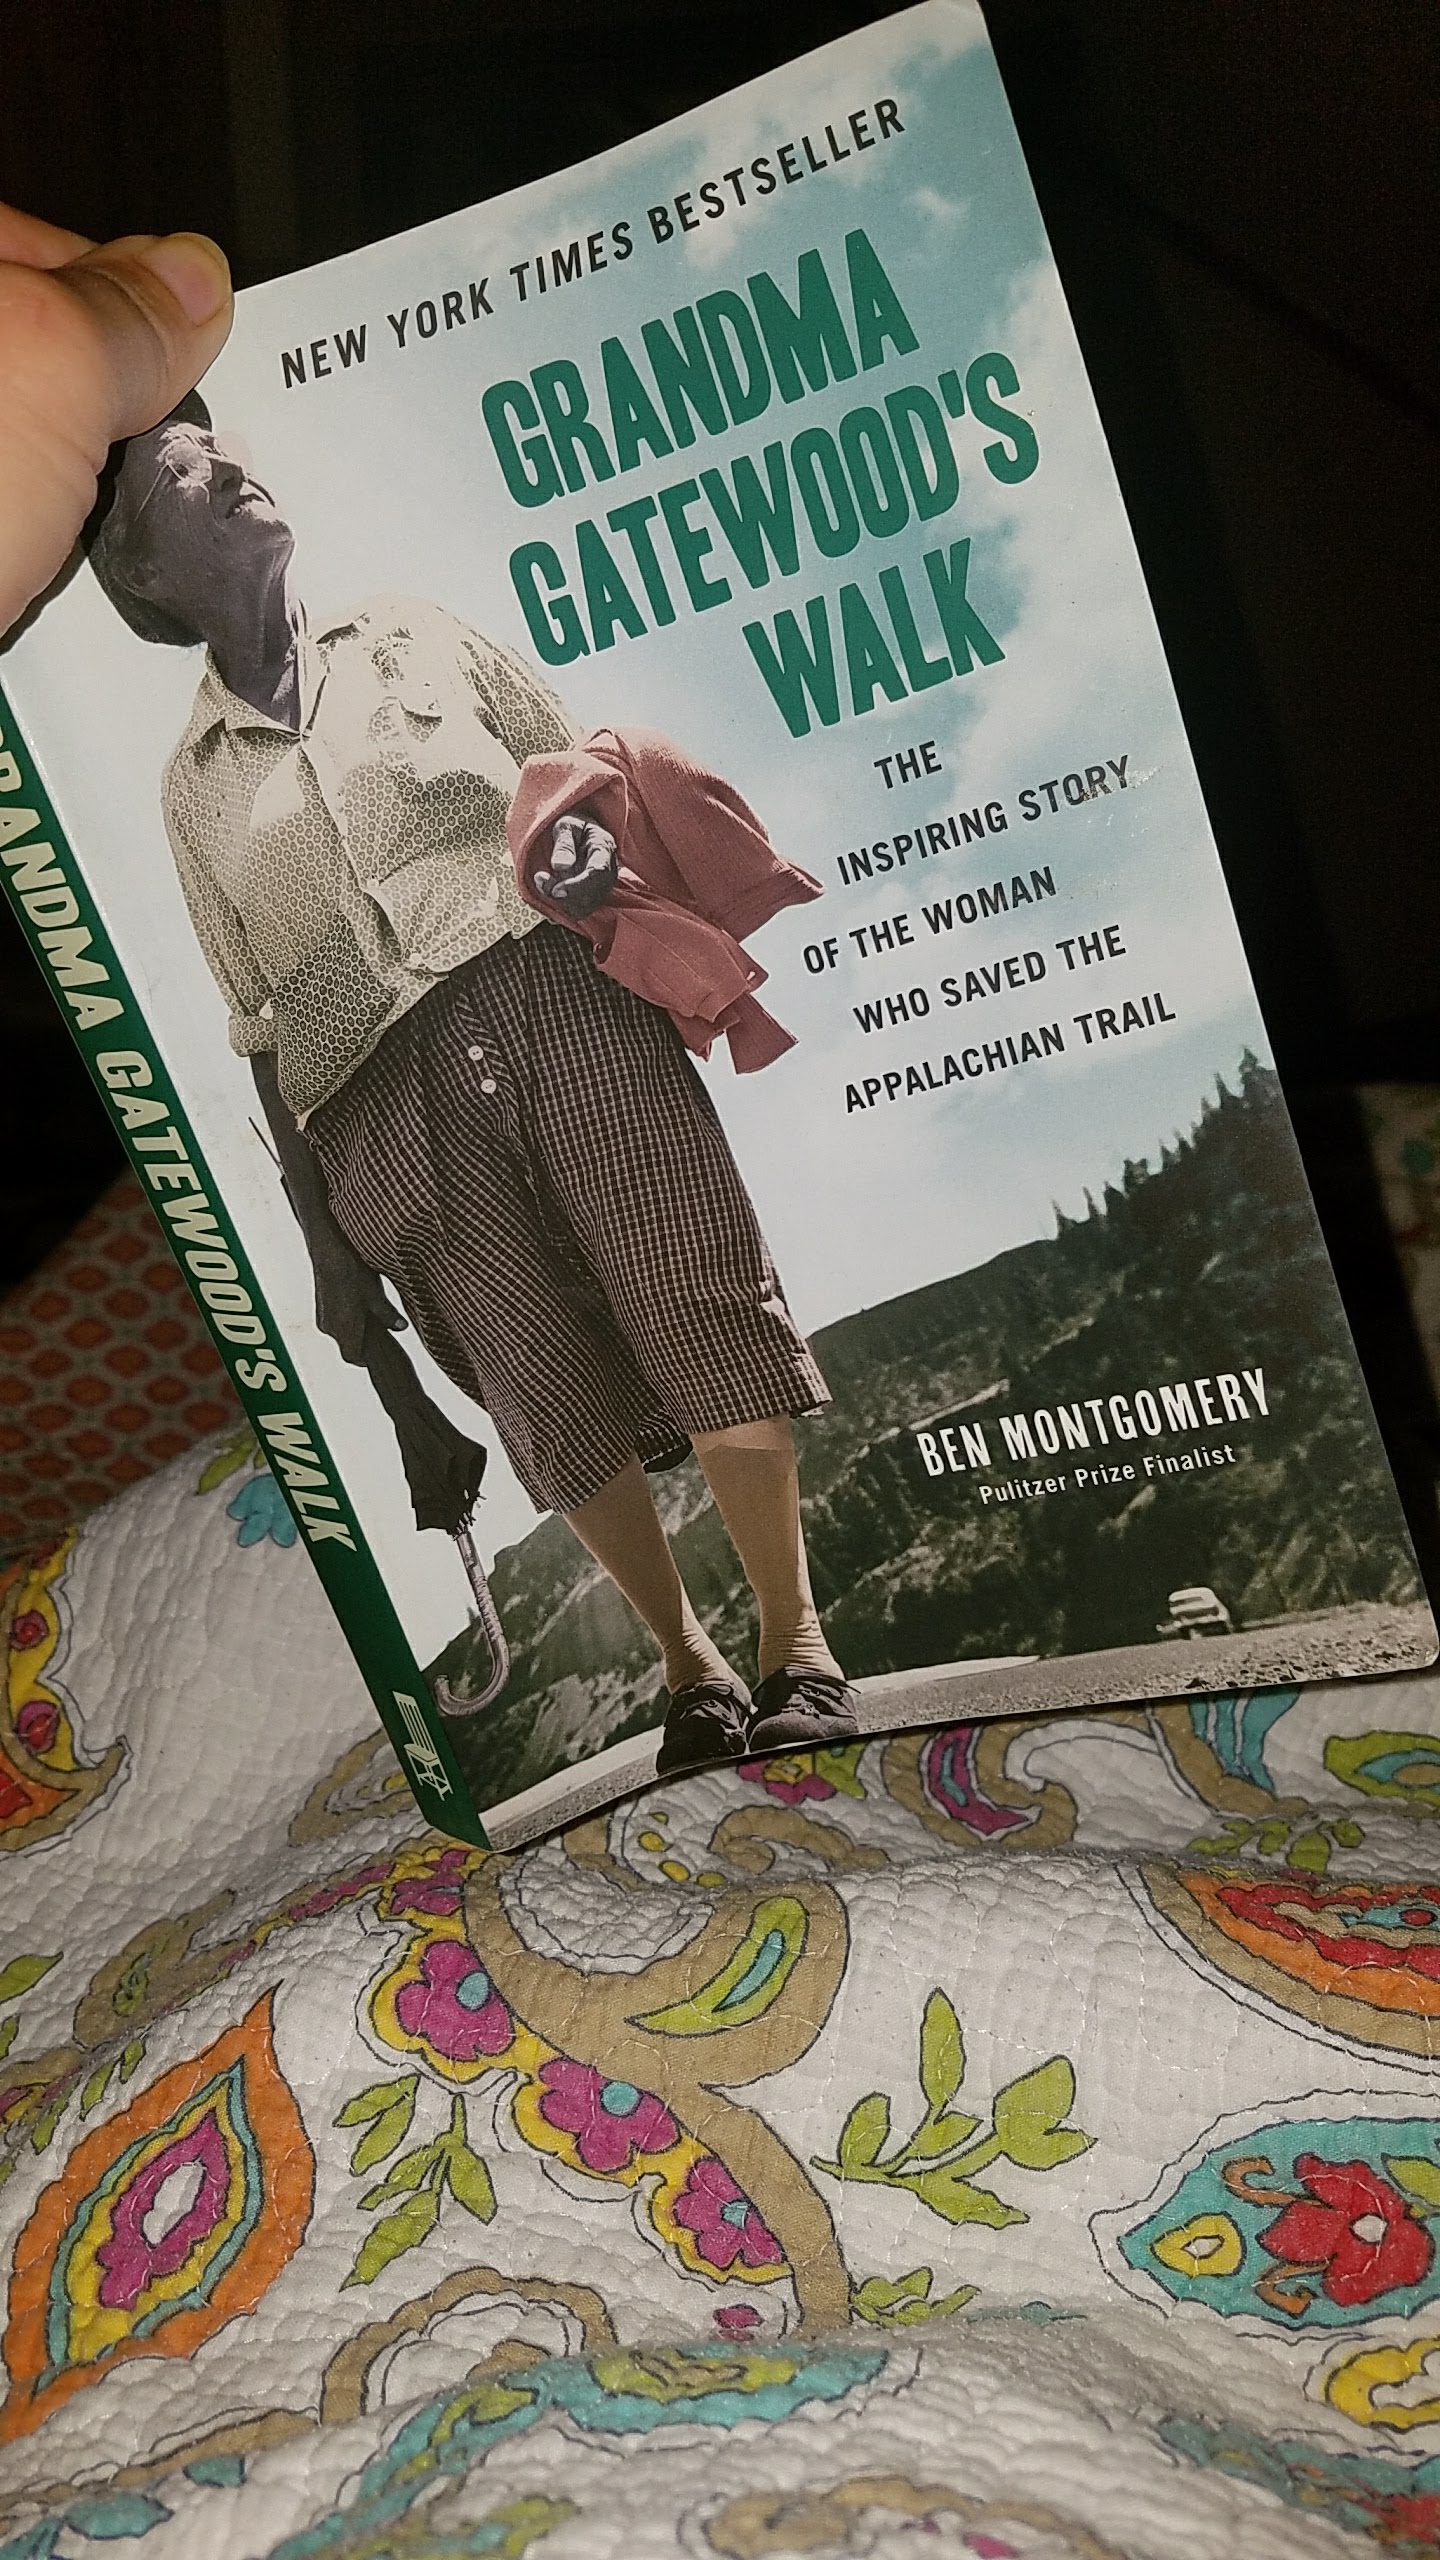 You are currently viewing Grandma Gatewood’s Walk